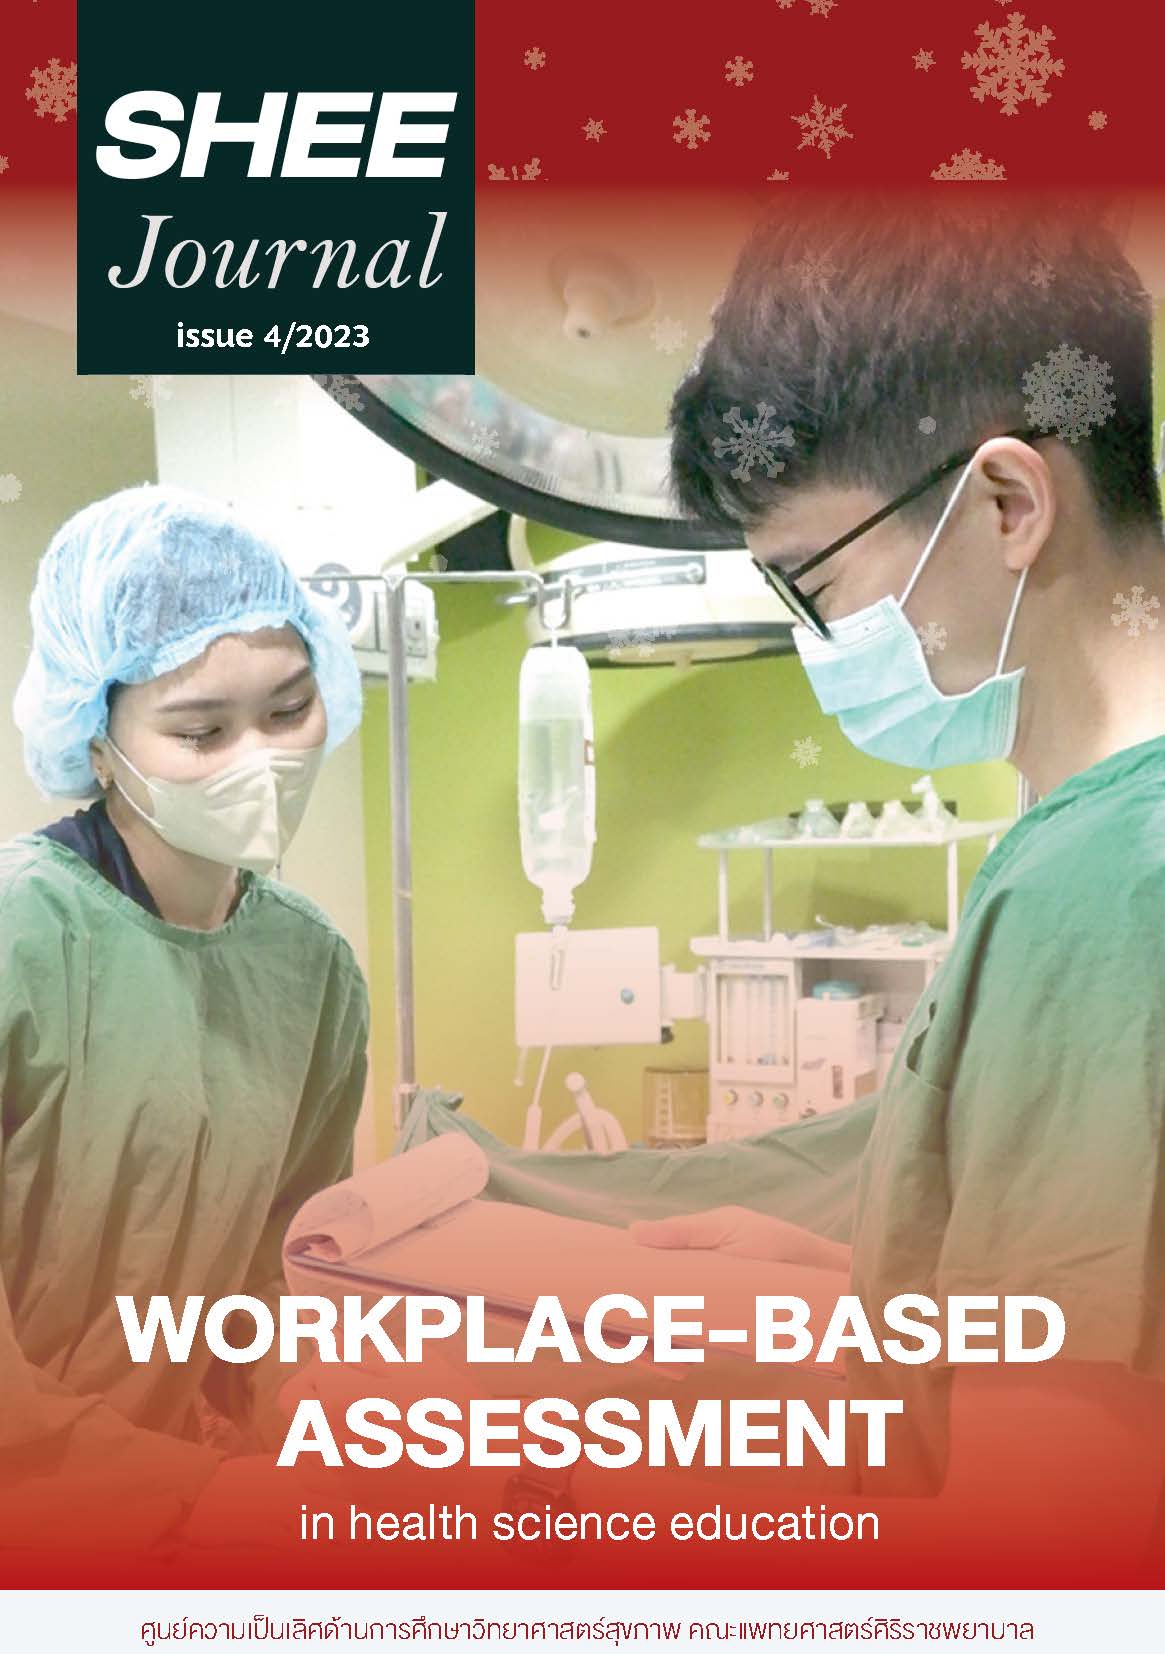 Journal Issue 4, 2023 Workplace-based Assessment (WPBA)